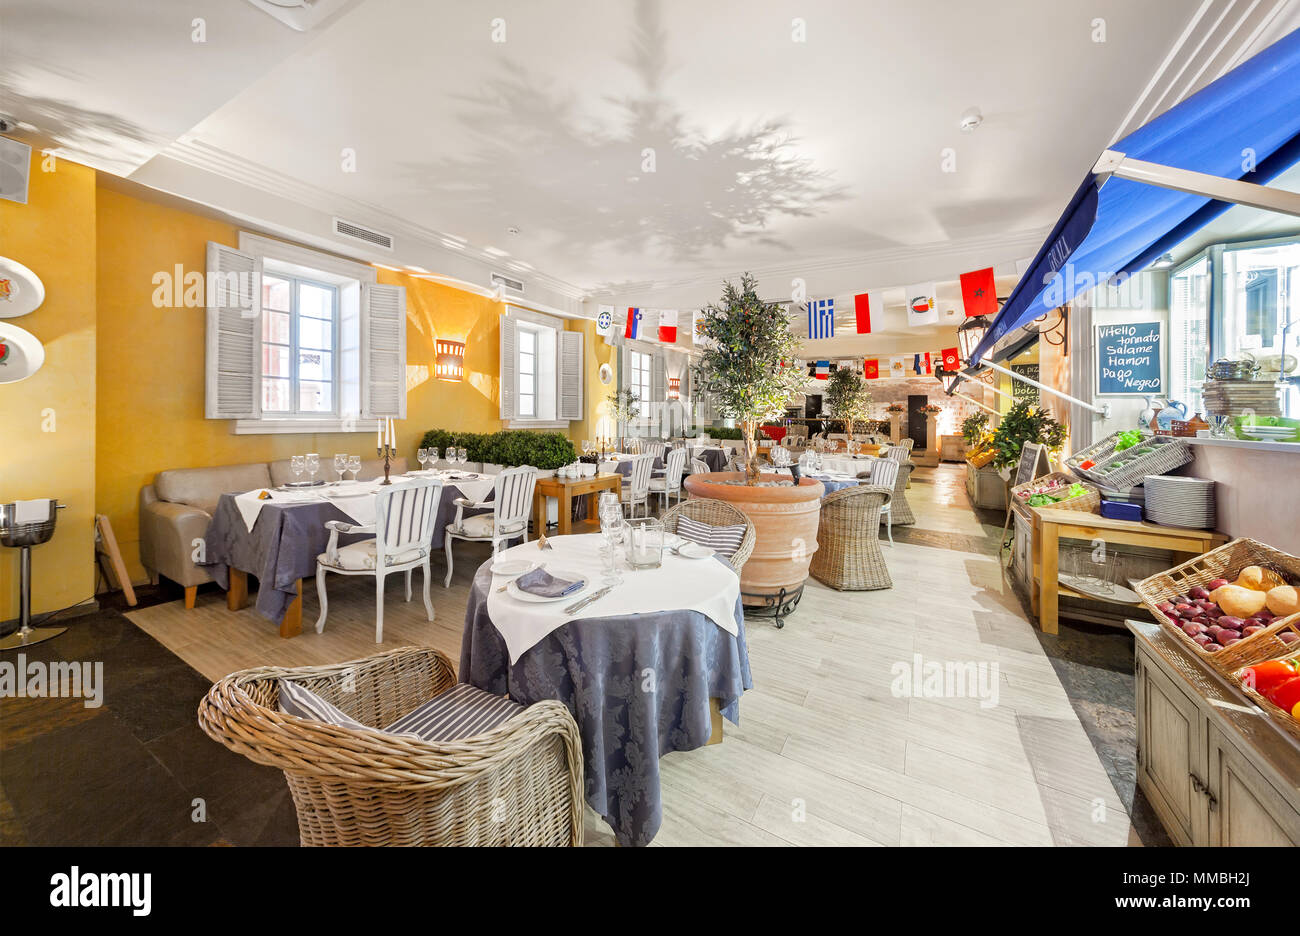 Page 2 - Restaurant Interior Mediterranean High Resolution Stock  Photography and Images - Alamy